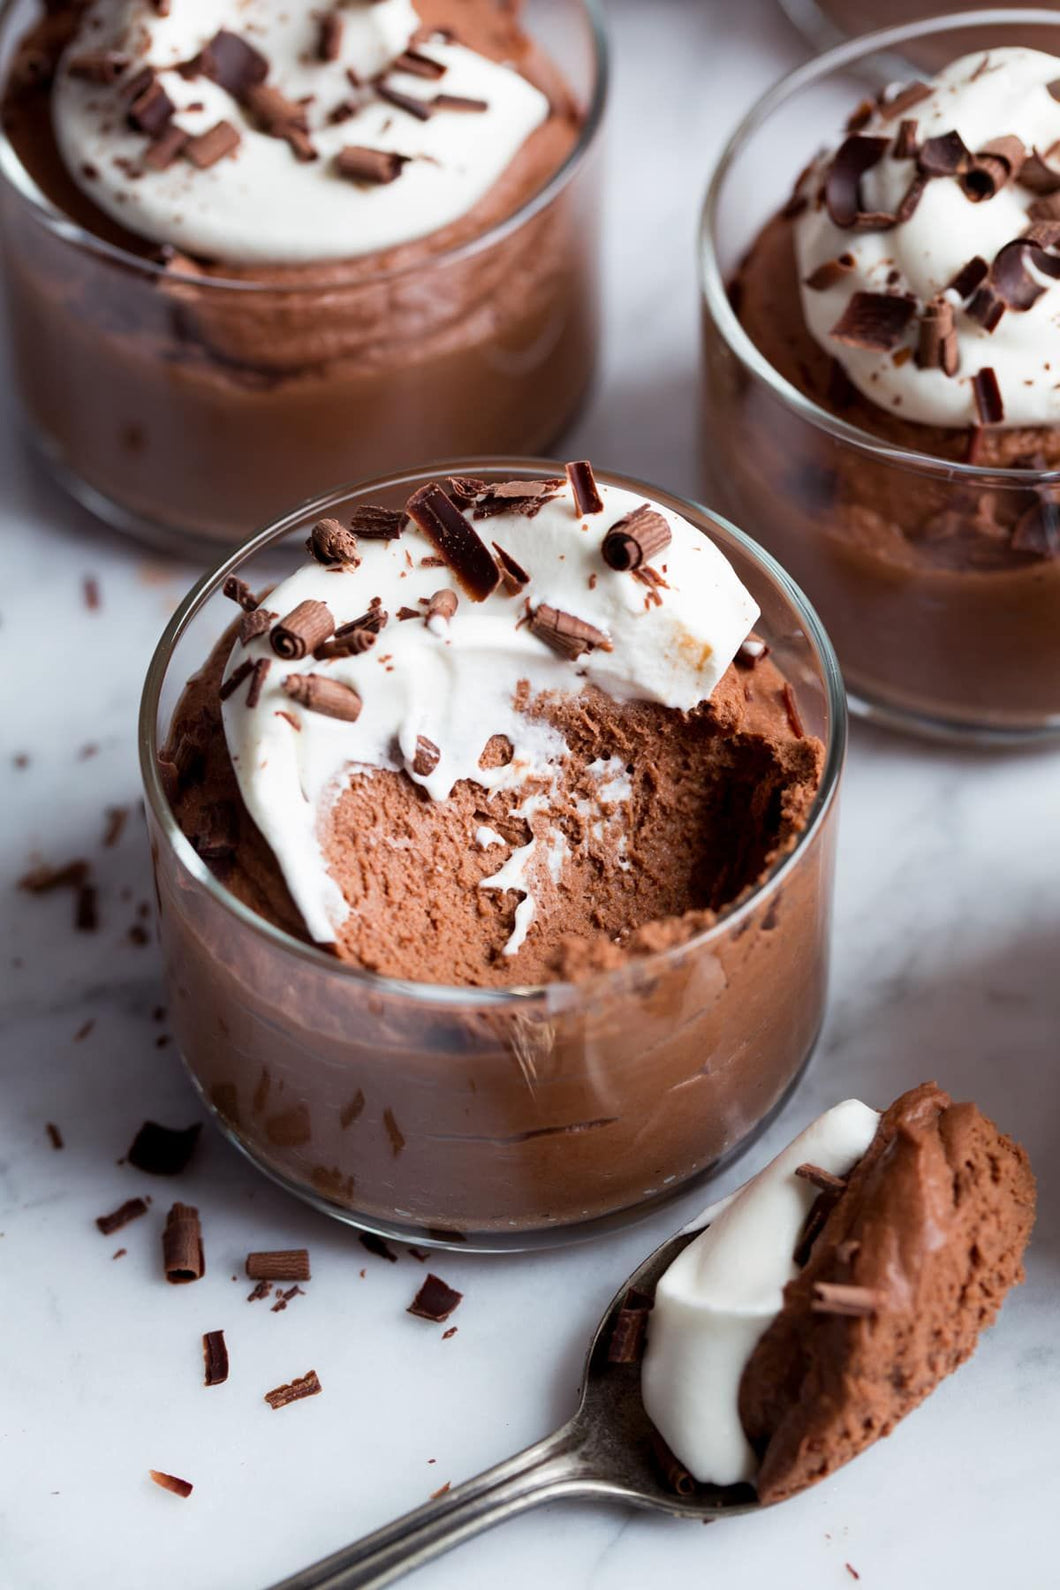 Chocolate Mousse to Share